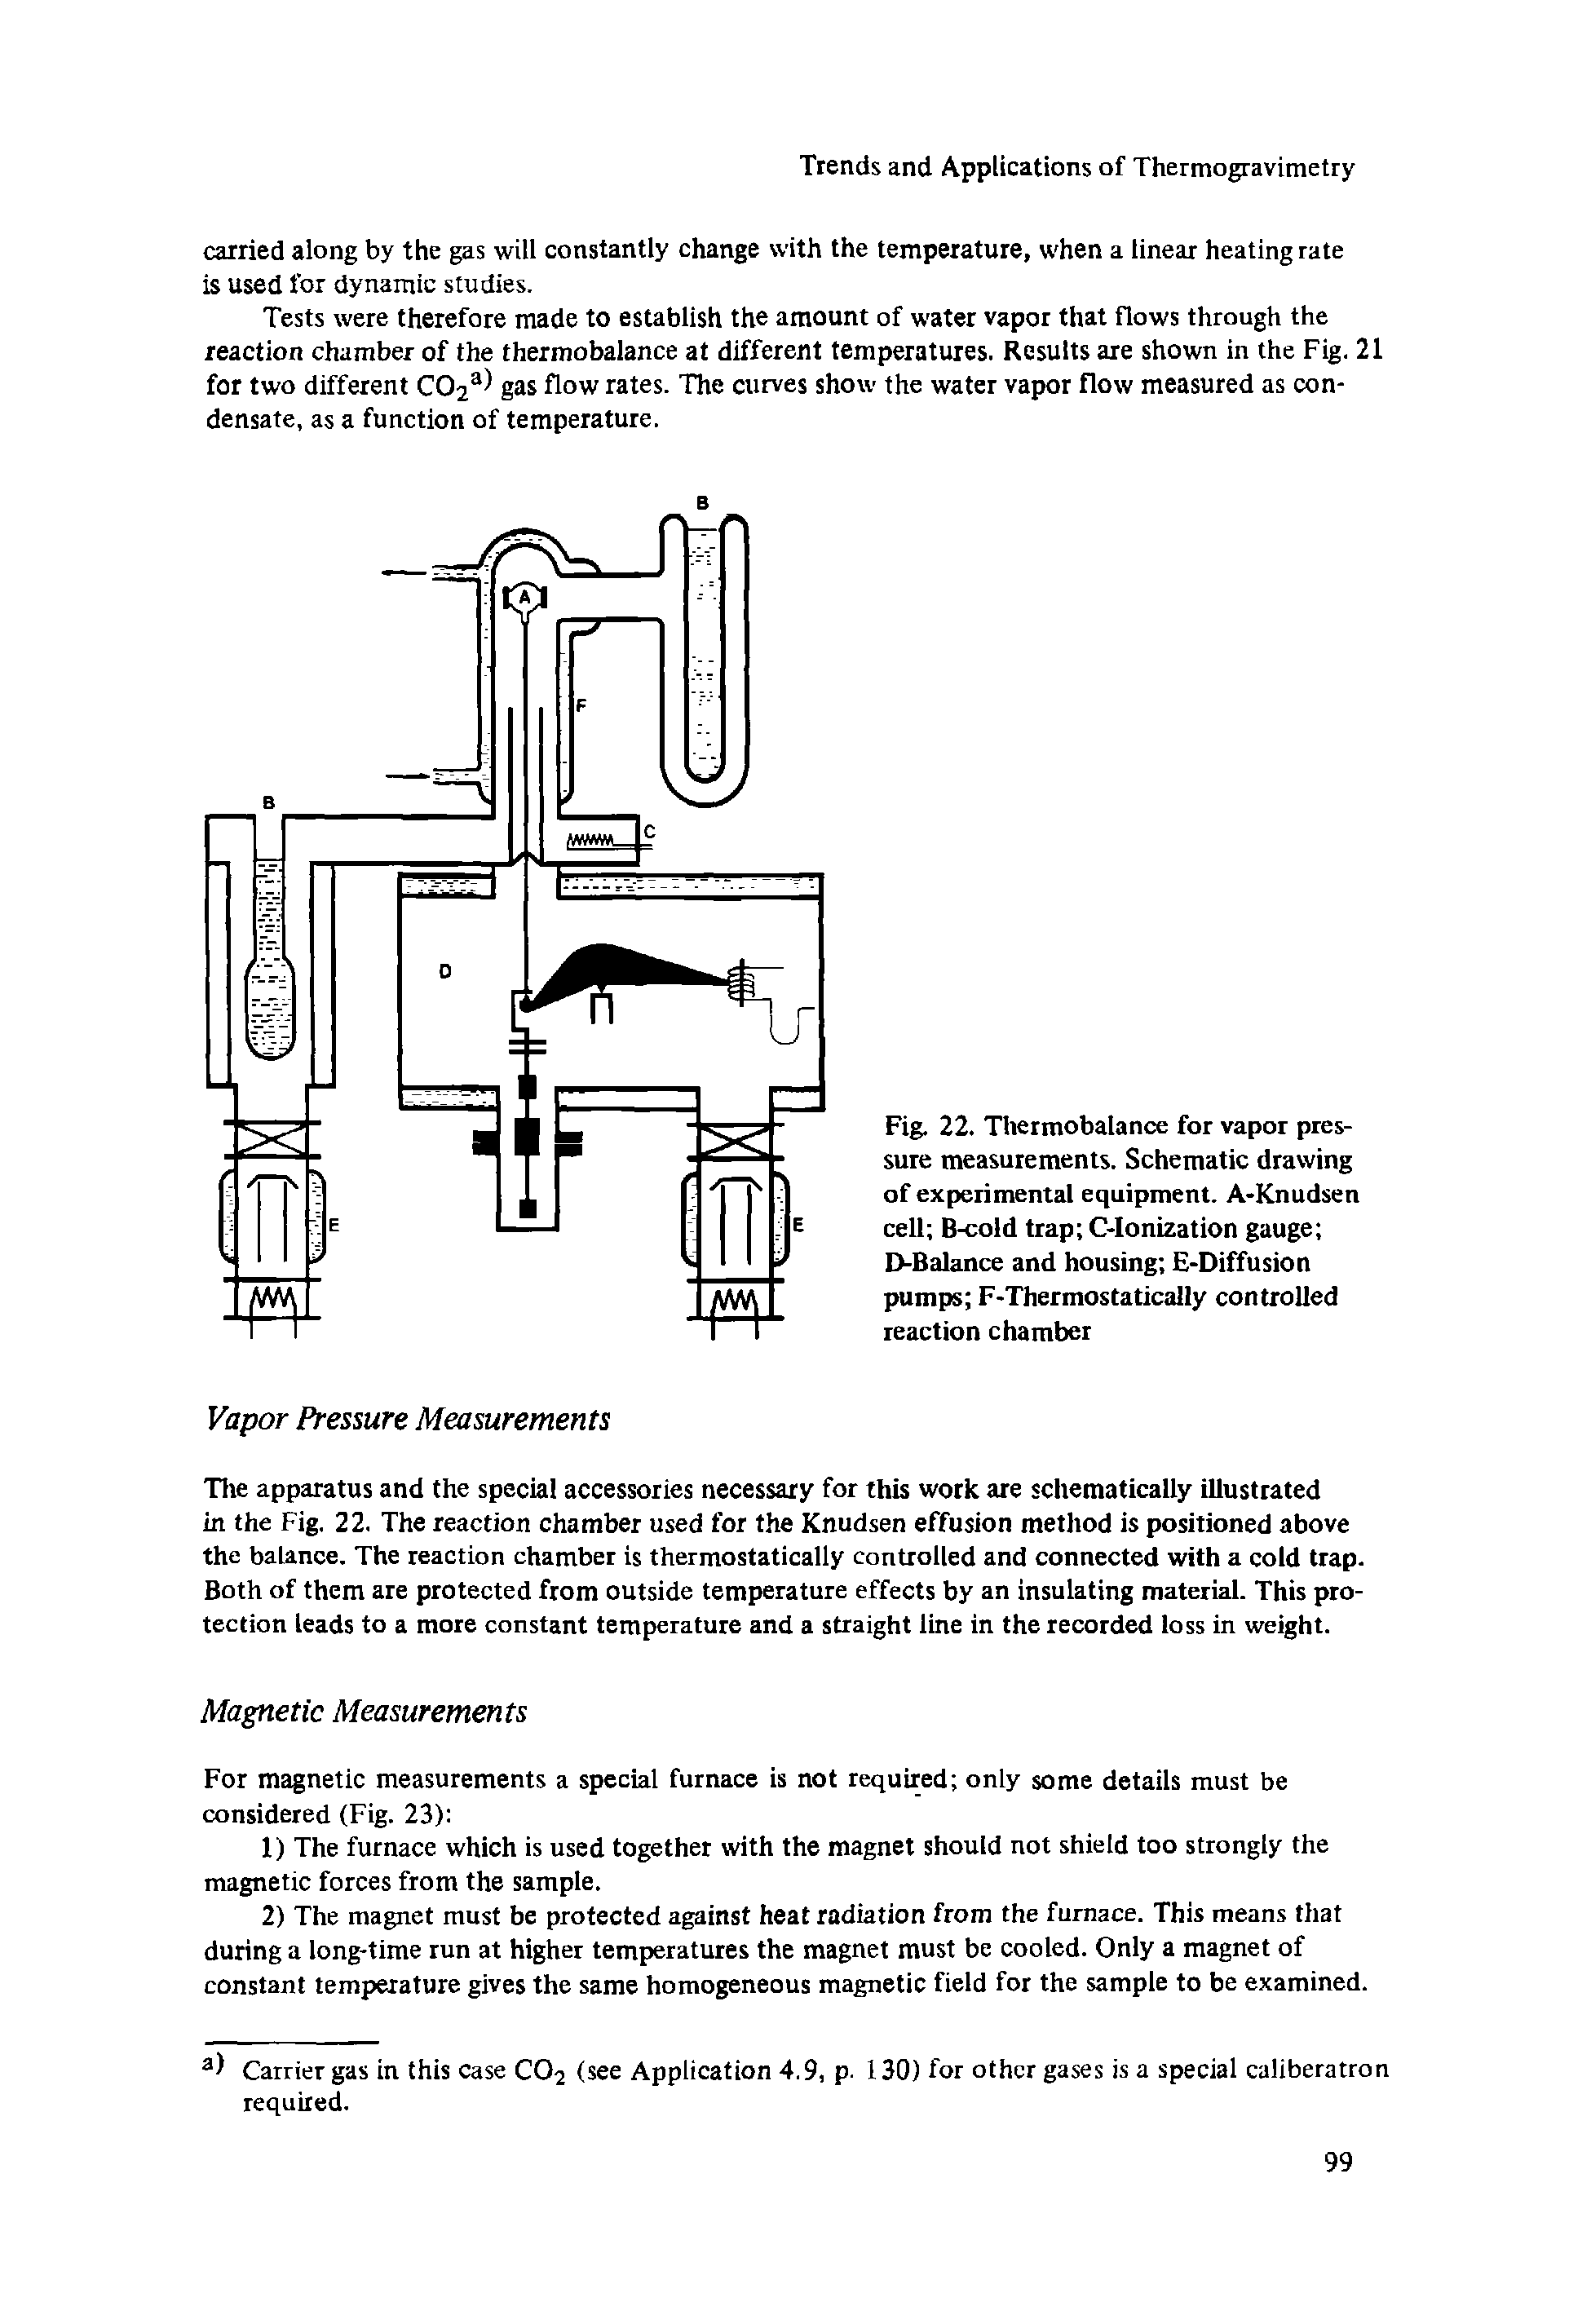 Fig. 22. Thermobalance for vapor pressure measurements. Schematic drawing of experimental equipment. A-Knudsen cell B-cold trap C-Ionization gauge D-Balance and housing E-Diffusion pumps F-Thermostatically controlled reaction chamber...